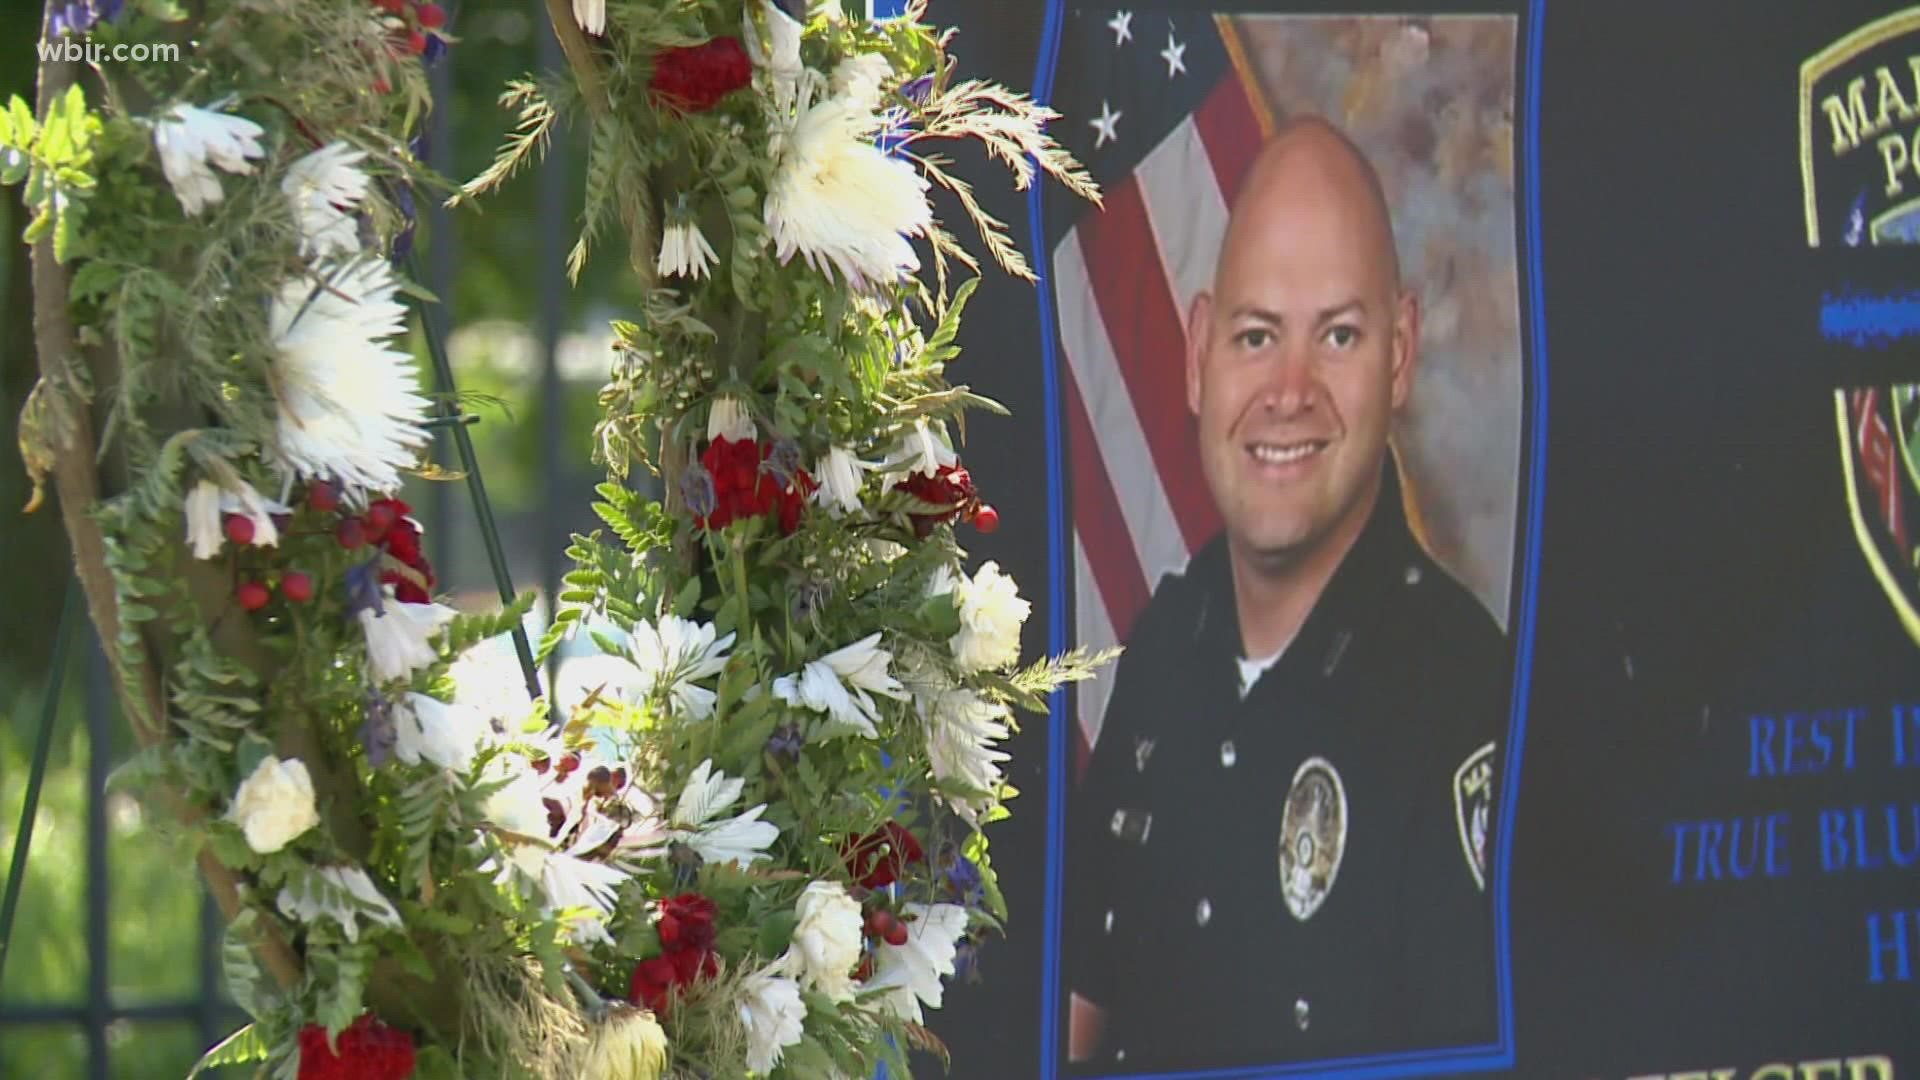 Maryville Police Officer Kenny Moats was killed 5 years ago while he was on duty. He had served for 9 years.